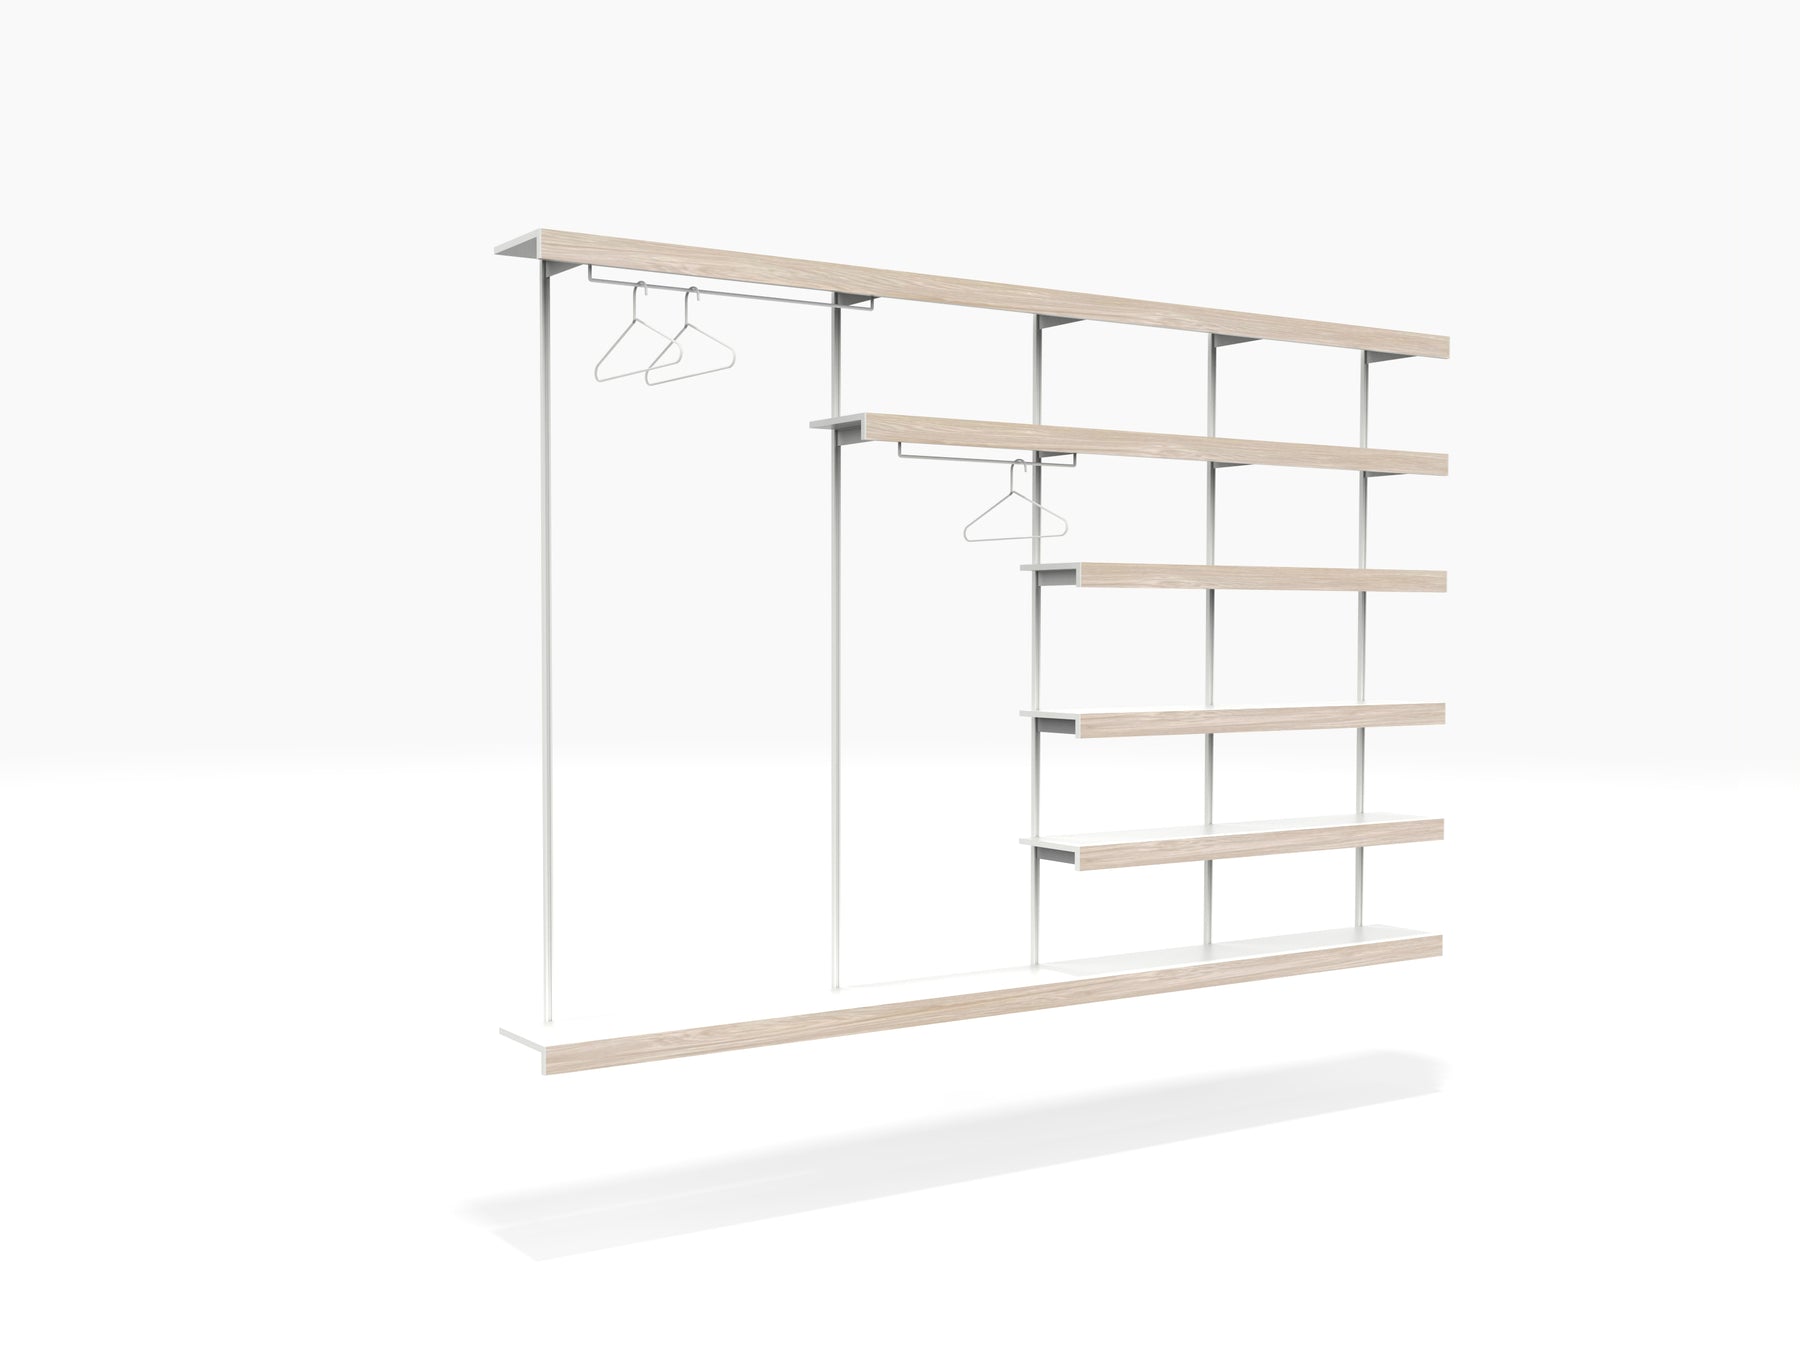 Walk-in wardrobe shelving system with long wall mounted shelves